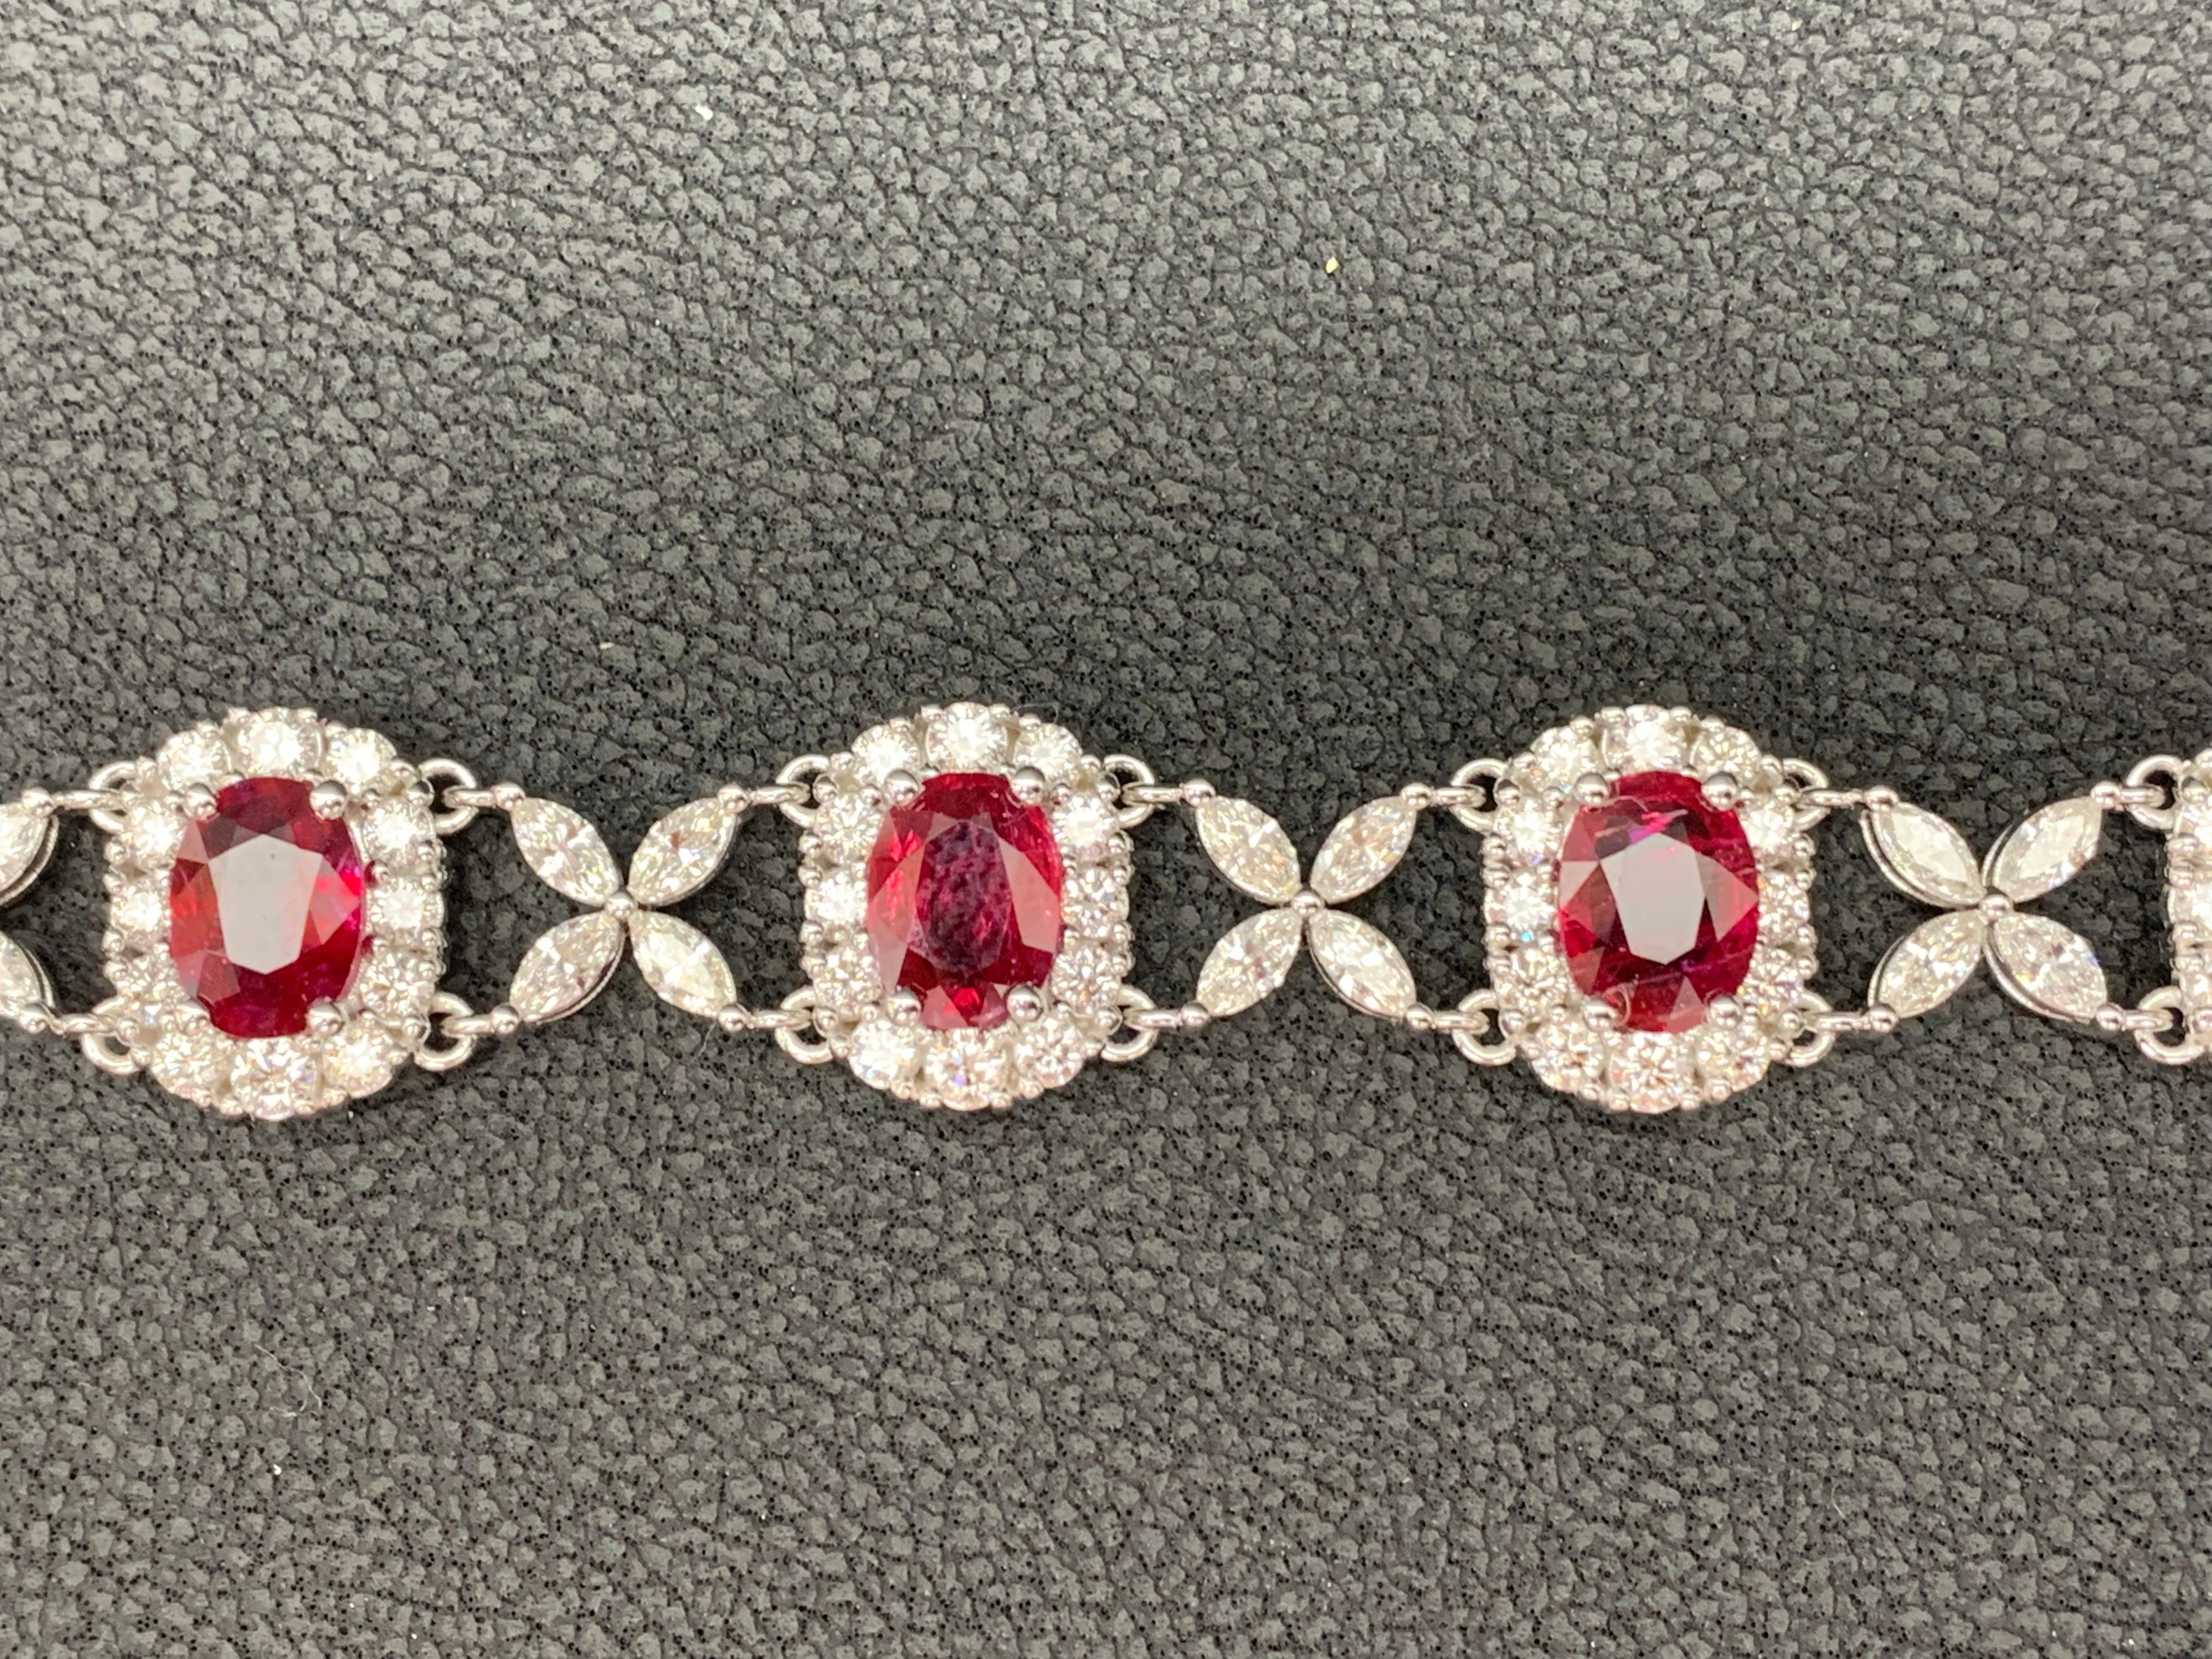 12.54 Carat Oval Cut Ruby and Diamond Tennis Bracelet in 14K White Gold For Sale 2